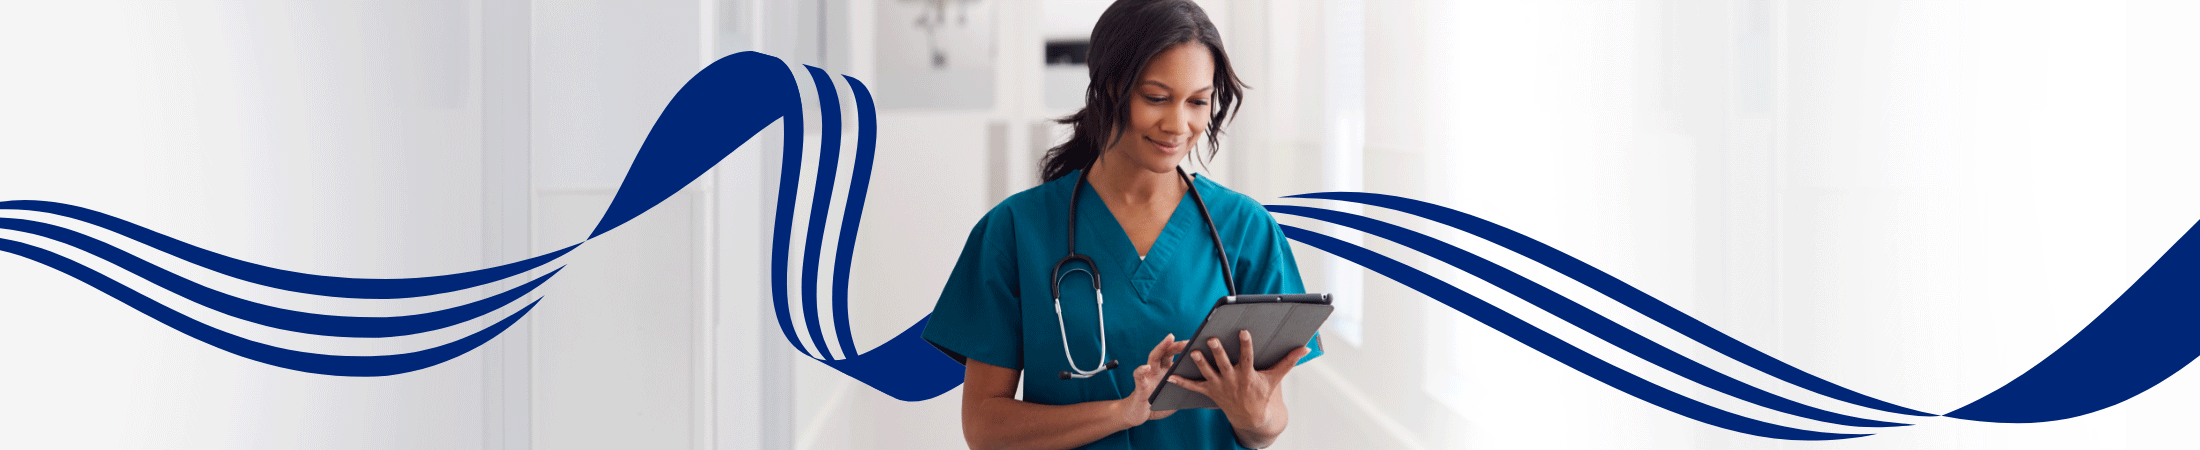 Health care provider reviewing information on a tablet